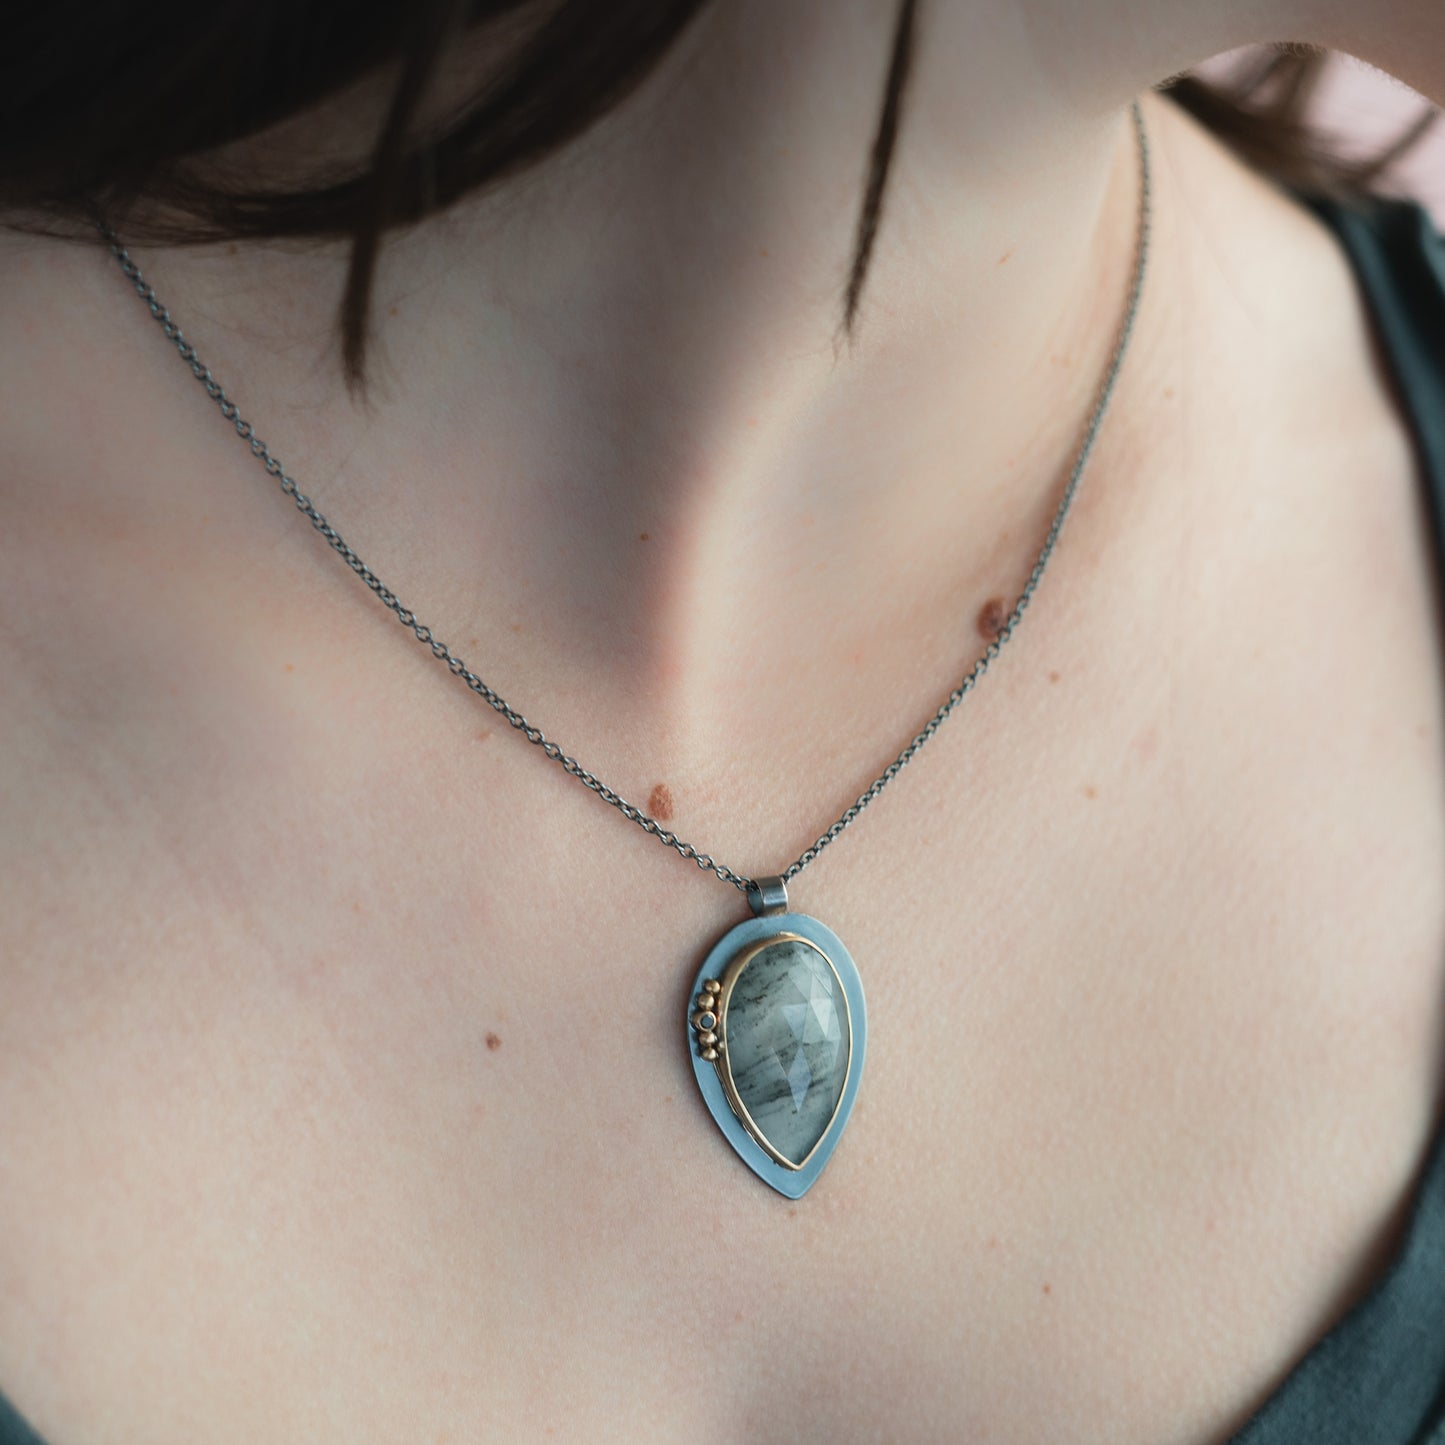 woman wearing oxidized silver pendant with grey rose cut stone and black diamond